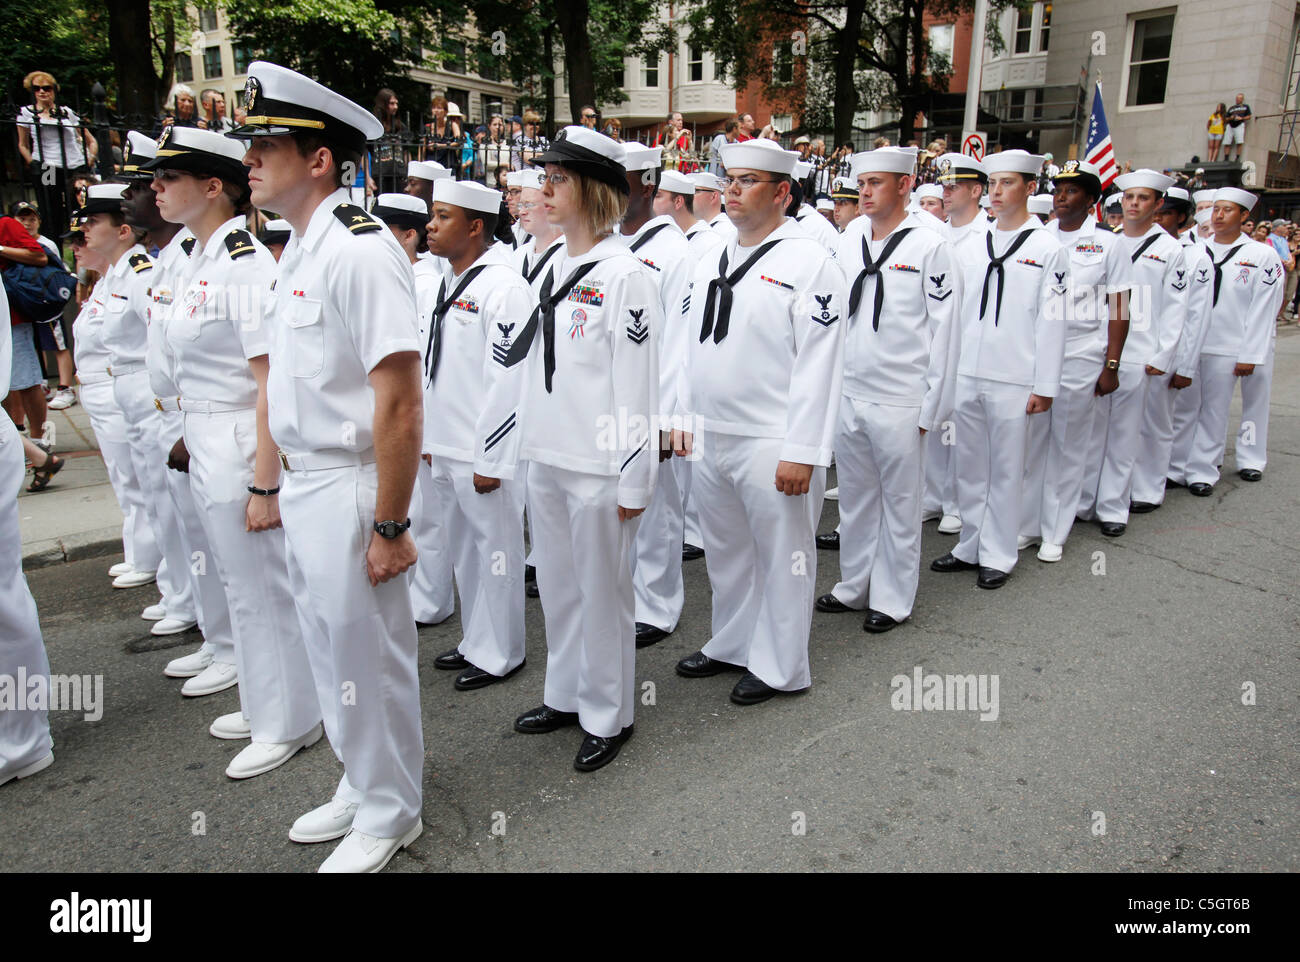 U.S. Navy sailors in formation, 4th of July parade, Boston, Massachusetts Stock Photo